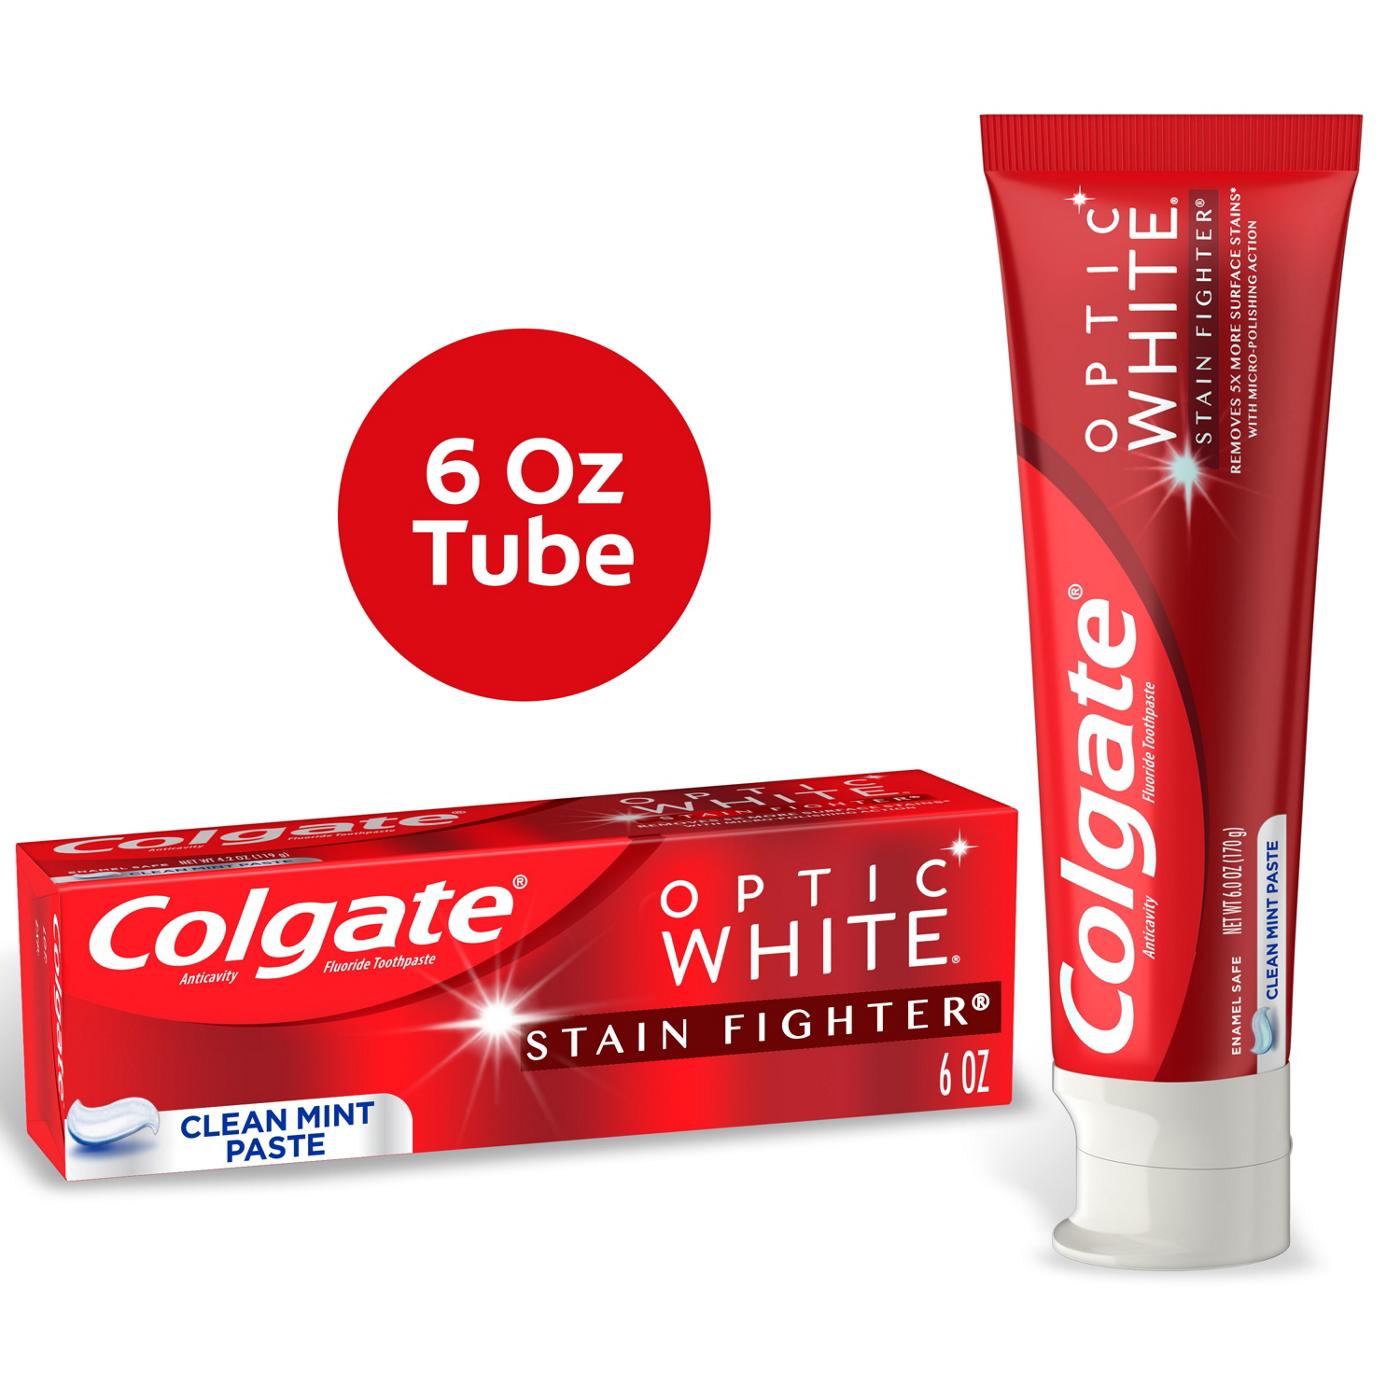 Colgate Optic White Anticavity Toothpaste - Clean Mint; image 2 of 10